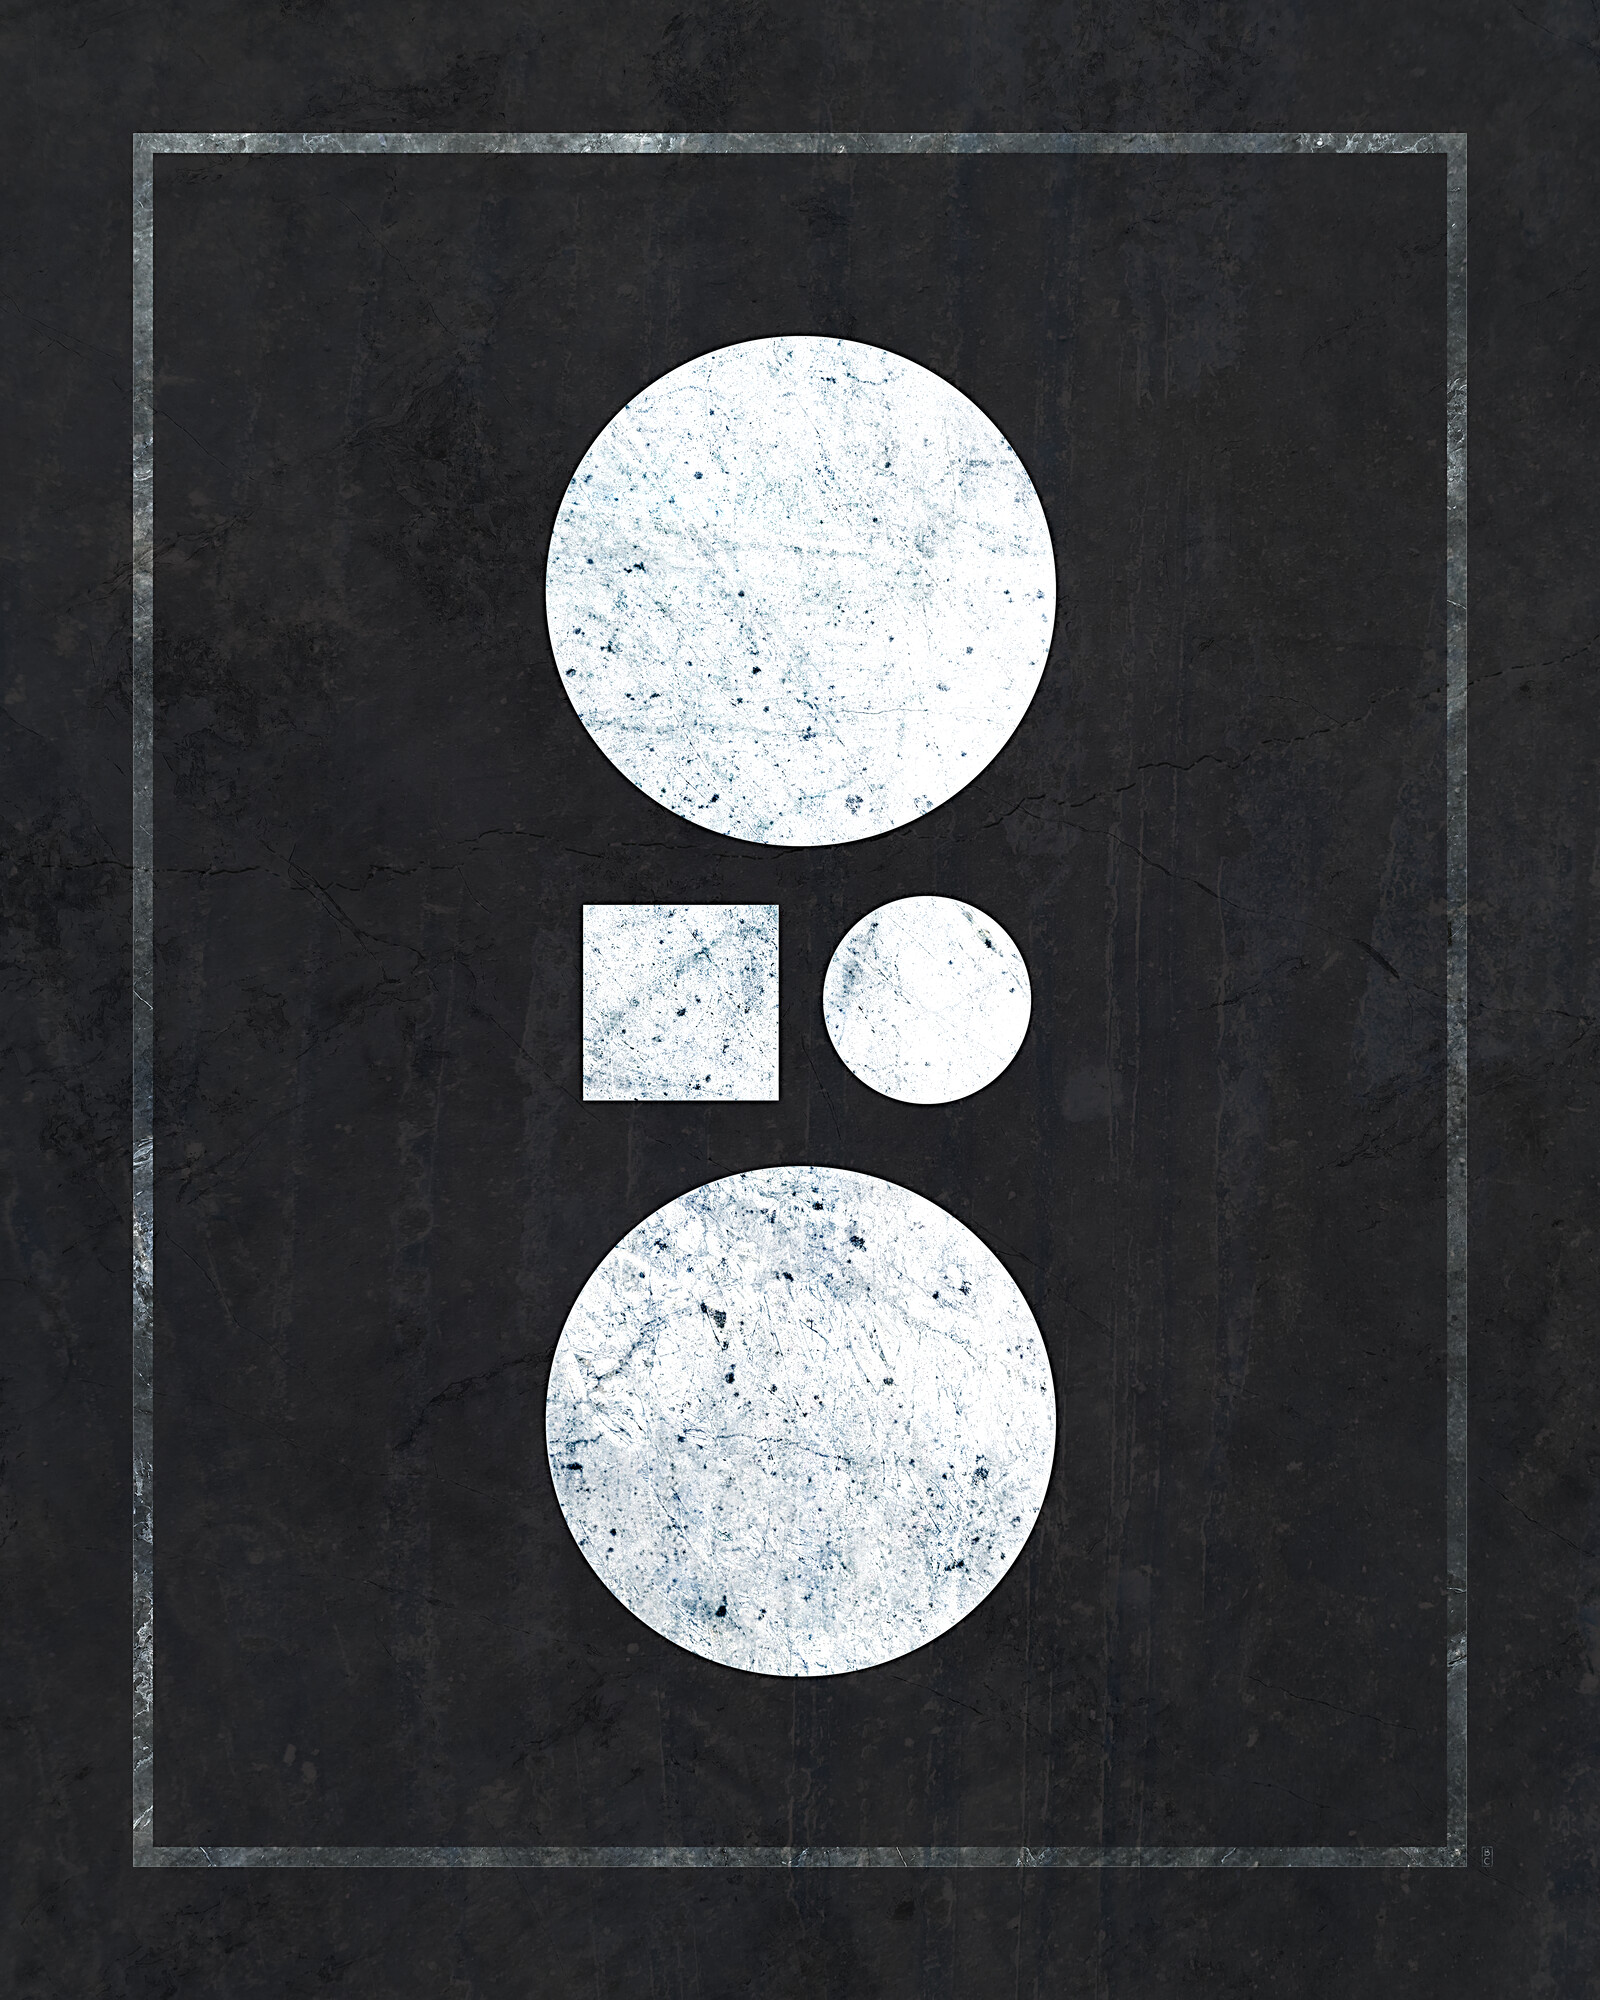 A white square and a white circle, with larger white circles above and below, on a black background.